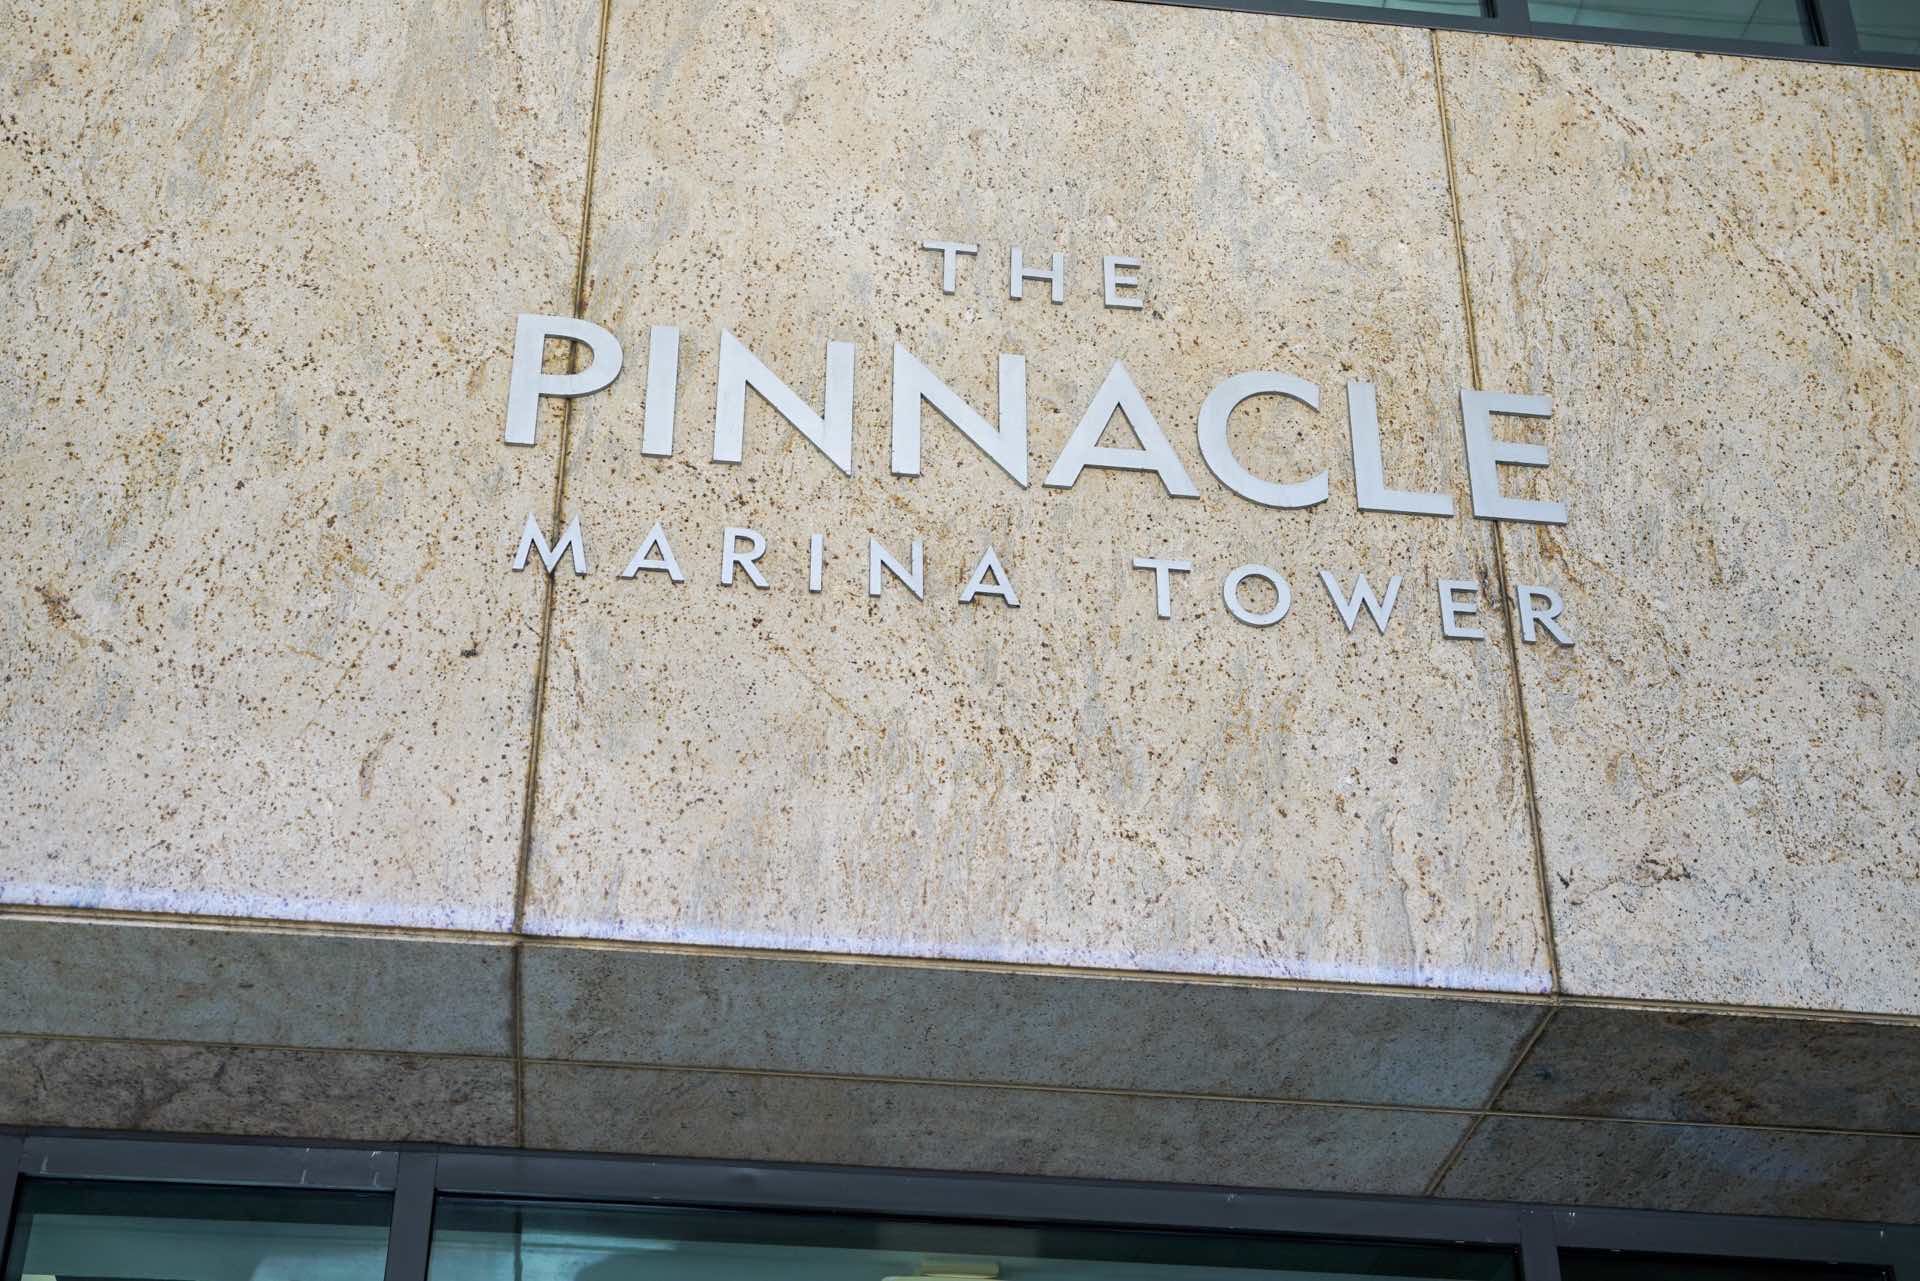 Building sign that reads "the pinnacle marina tower"